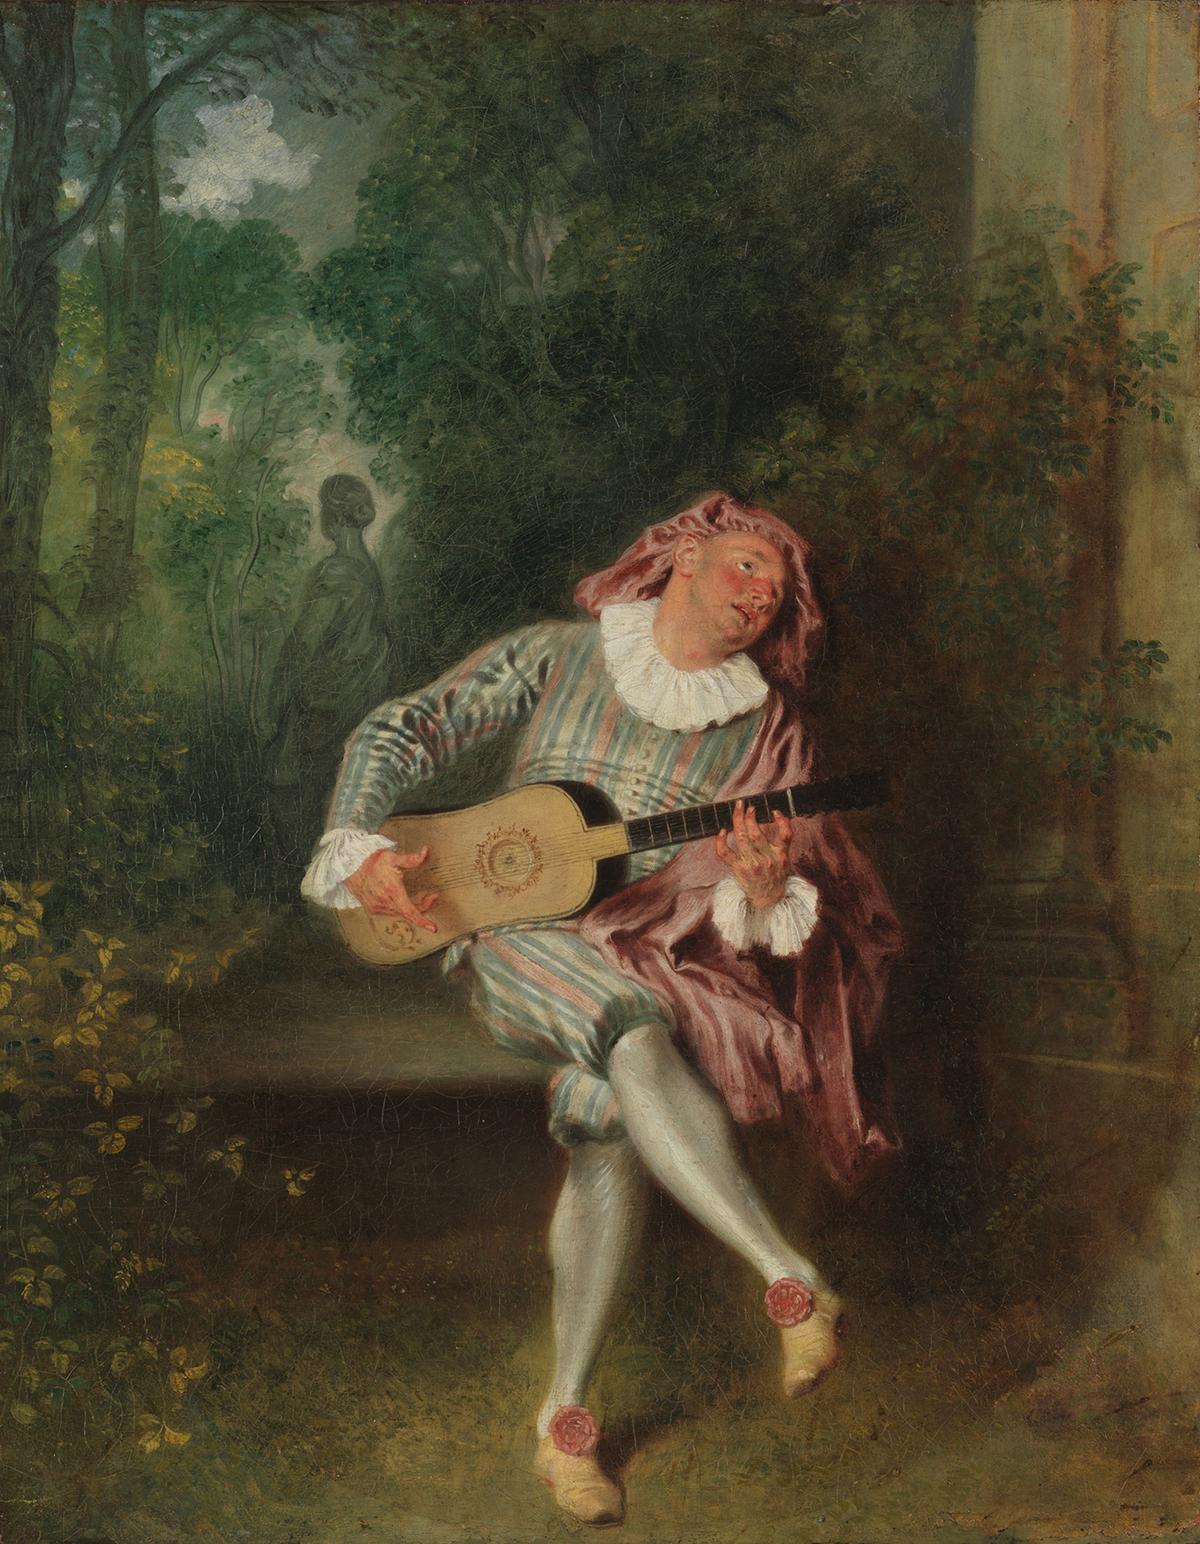 "Mezzetin," circa 1718–1720, by Antoine Watteau. Oil on canvas; 21 3/4 inches by 17 inches. The Metropolitan Museum of Art, New York City. (Public Domain)